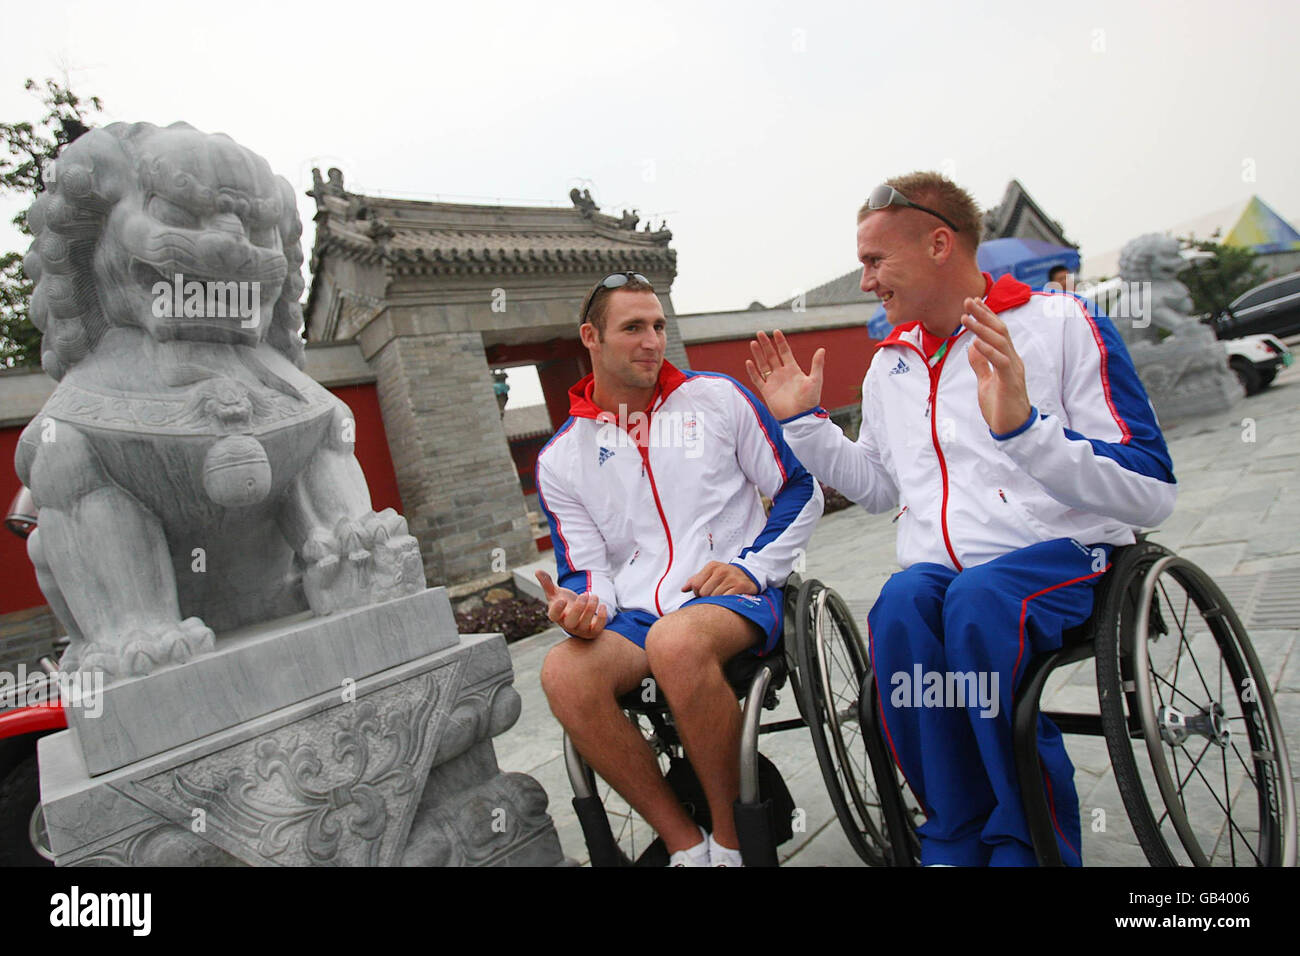 Paralympics - Beijing Paralympic Games 2008. Great Britain's Tom Aggar (left) from the Rowing team and David Weir from the Athletics team in the Paralympic Village in Beijing, China. Stock Photo